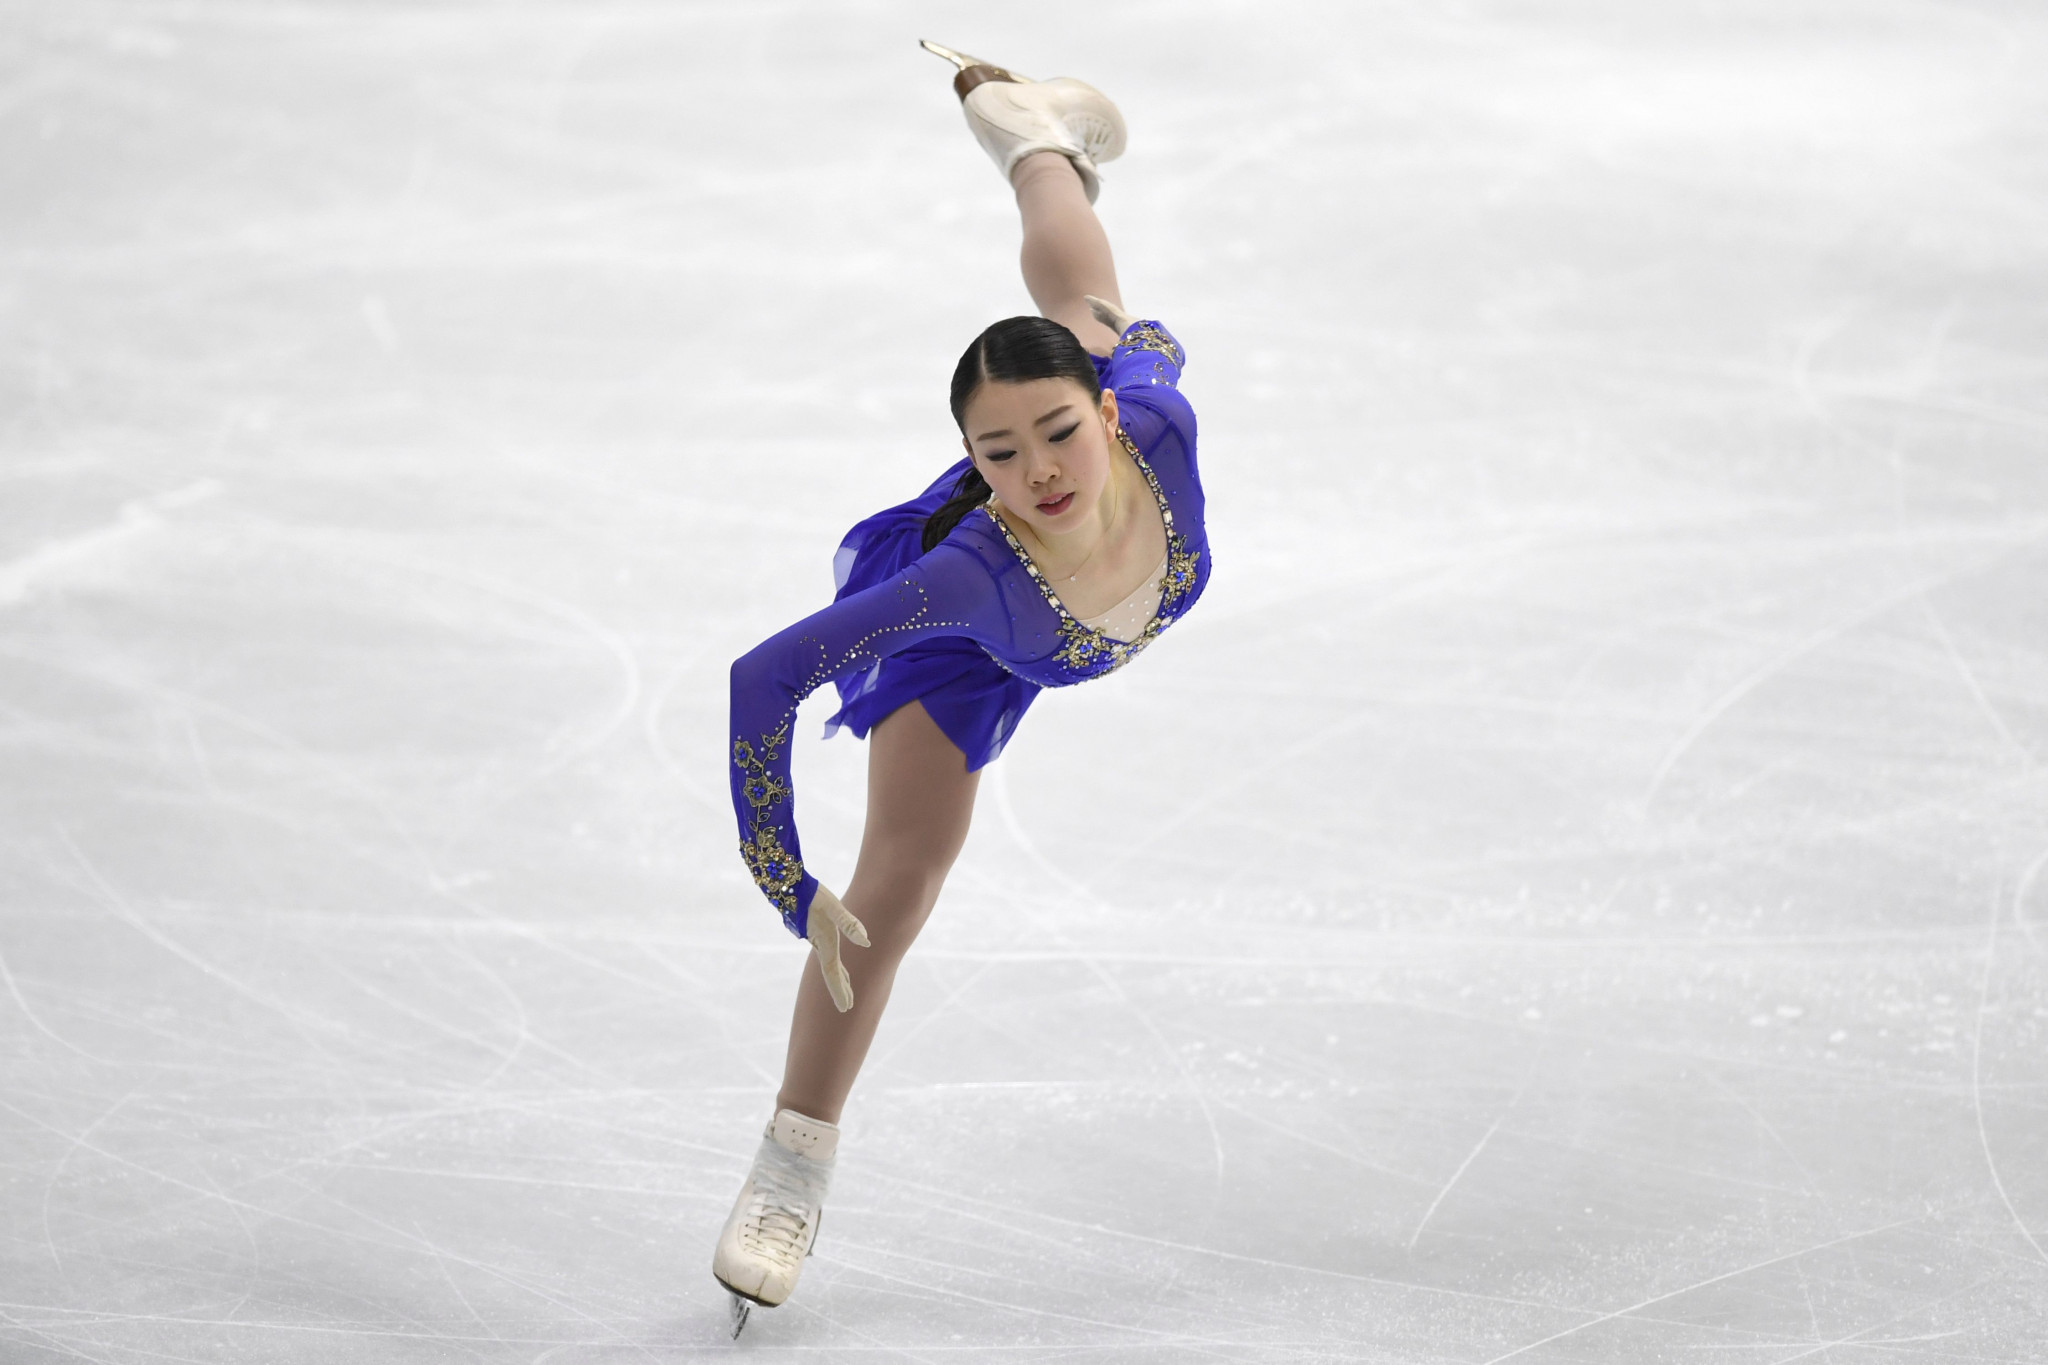 Defending champion Kihira claims lead in women's event at ISU Four Continents Figure Skating Championships